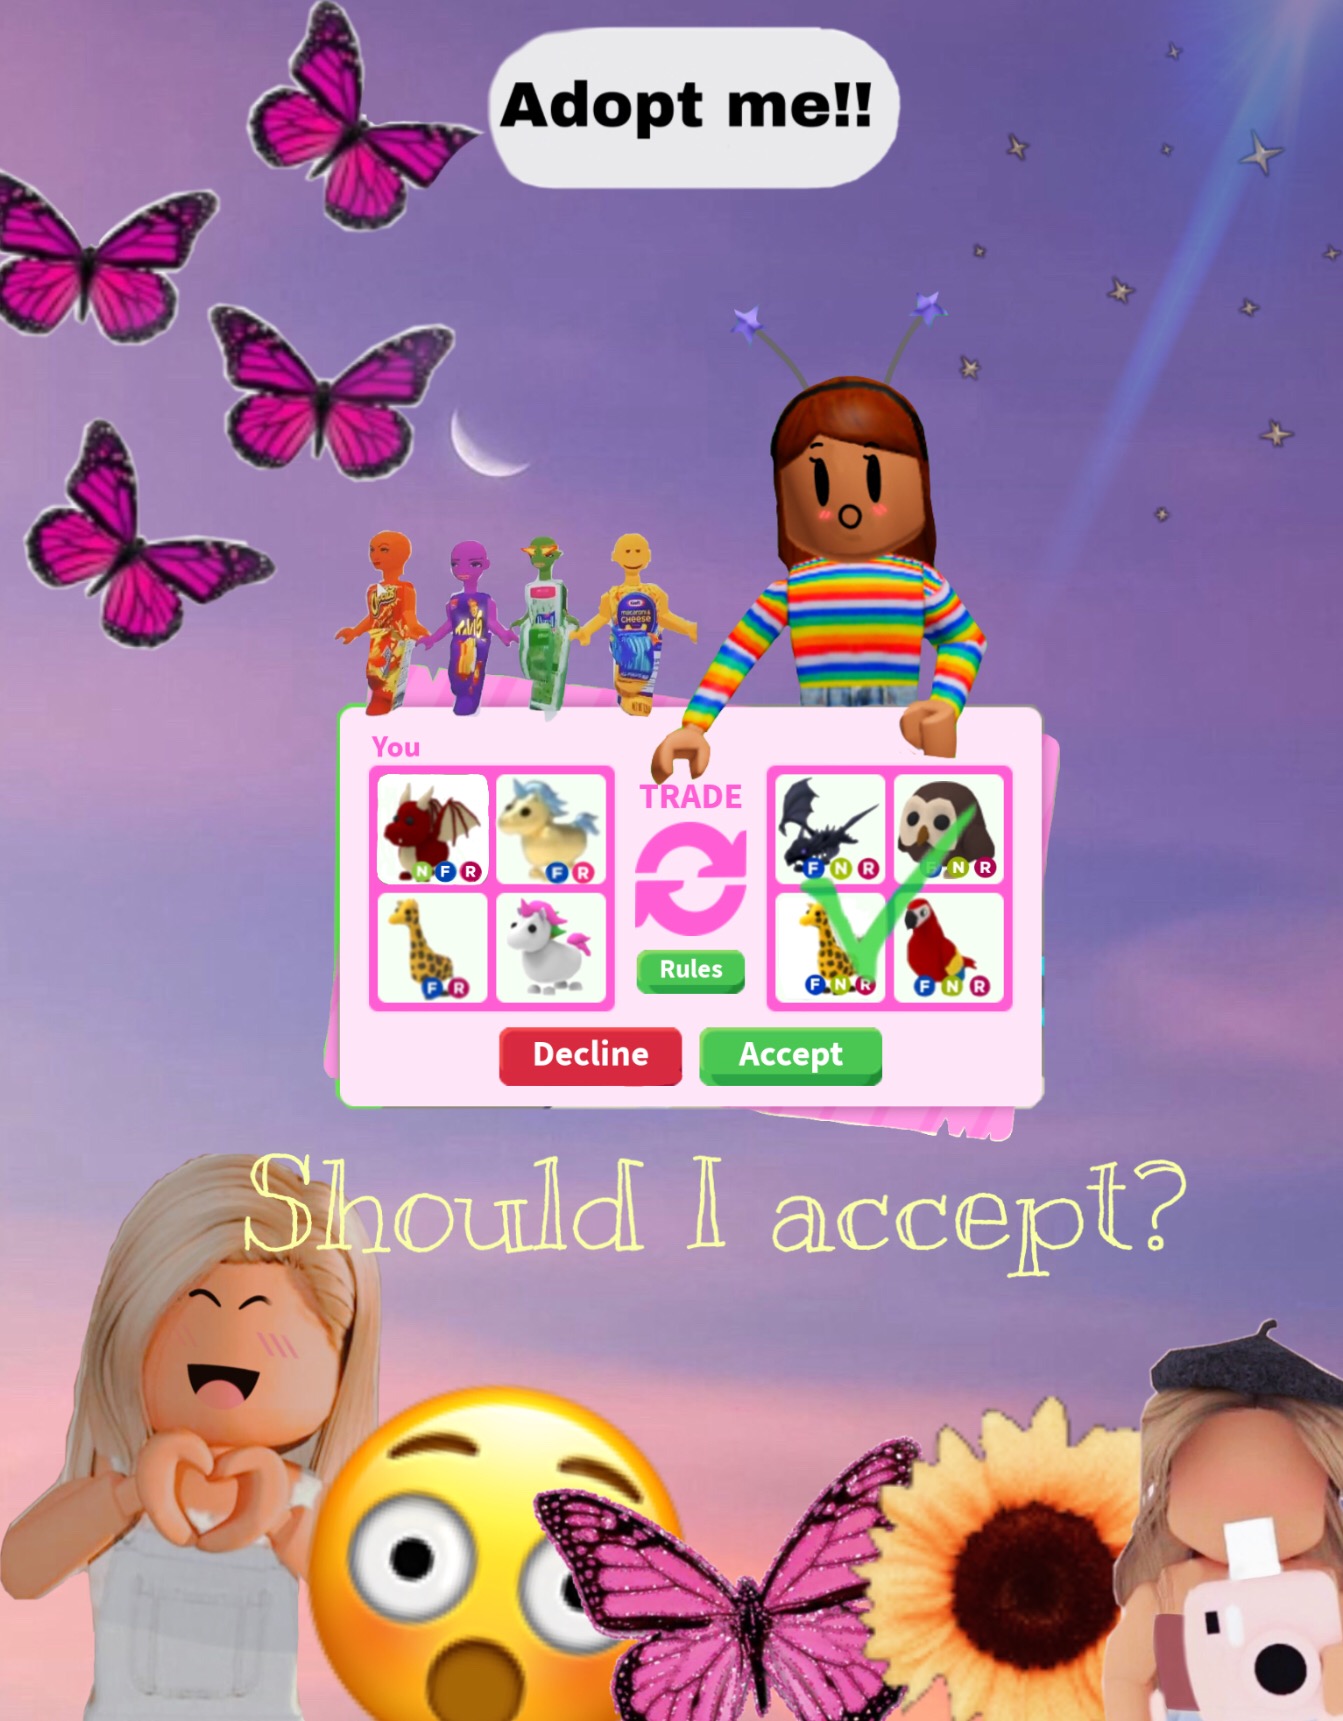 Roblox Adoptme Image By Roblox Girls - owl roblox adopt me